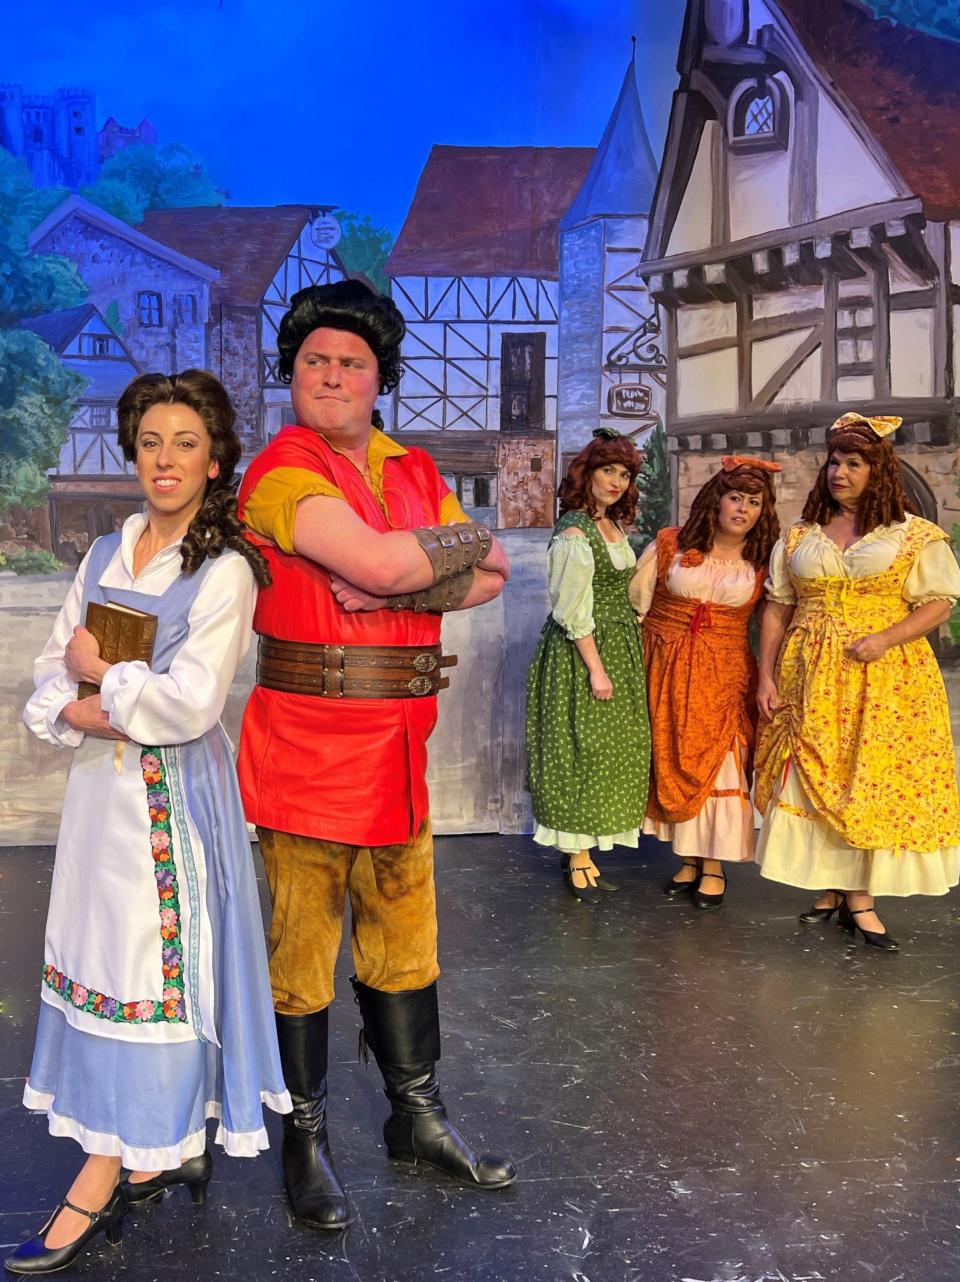 The cast of Falmouth Theatre Guild&#39;s production of &quot;Disney&#39;s Beauty and the Beast&quot; musical incudes, from left, Meghan Richardson as Belle; Bobby Price as Gaston&#39; and Cheri Prescott, Victoria Santos and Lori Lawson as &quot;Silly Girls.&quot;